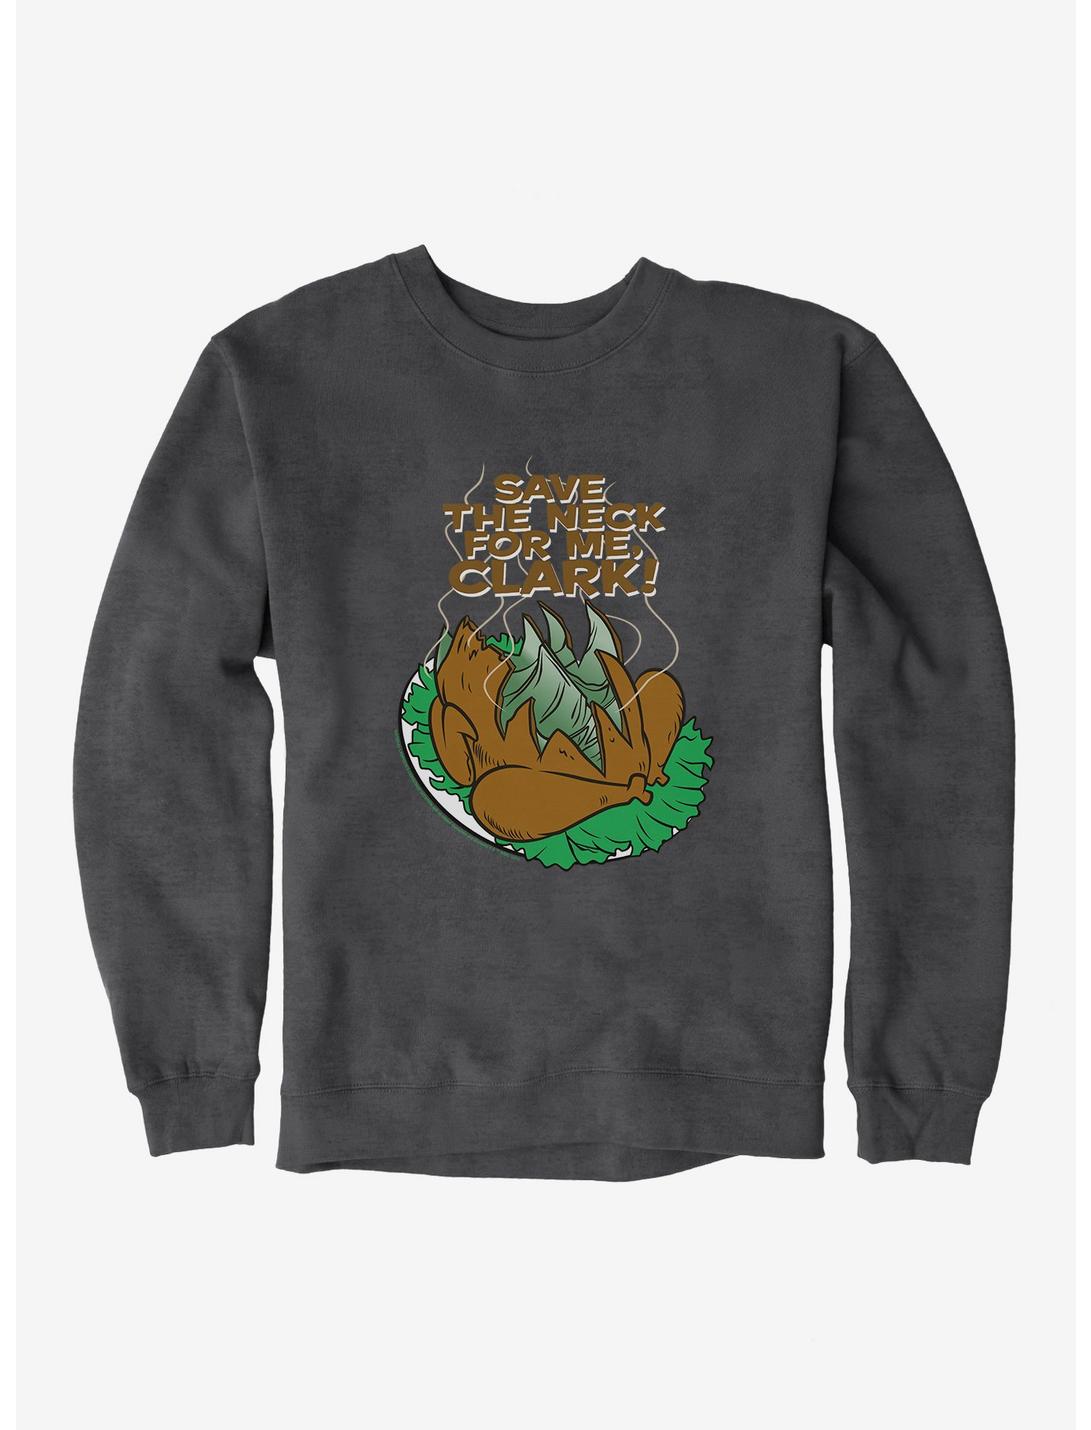 Christmas Vacation Save The Neck For Me Sweatshirt, , hi-res